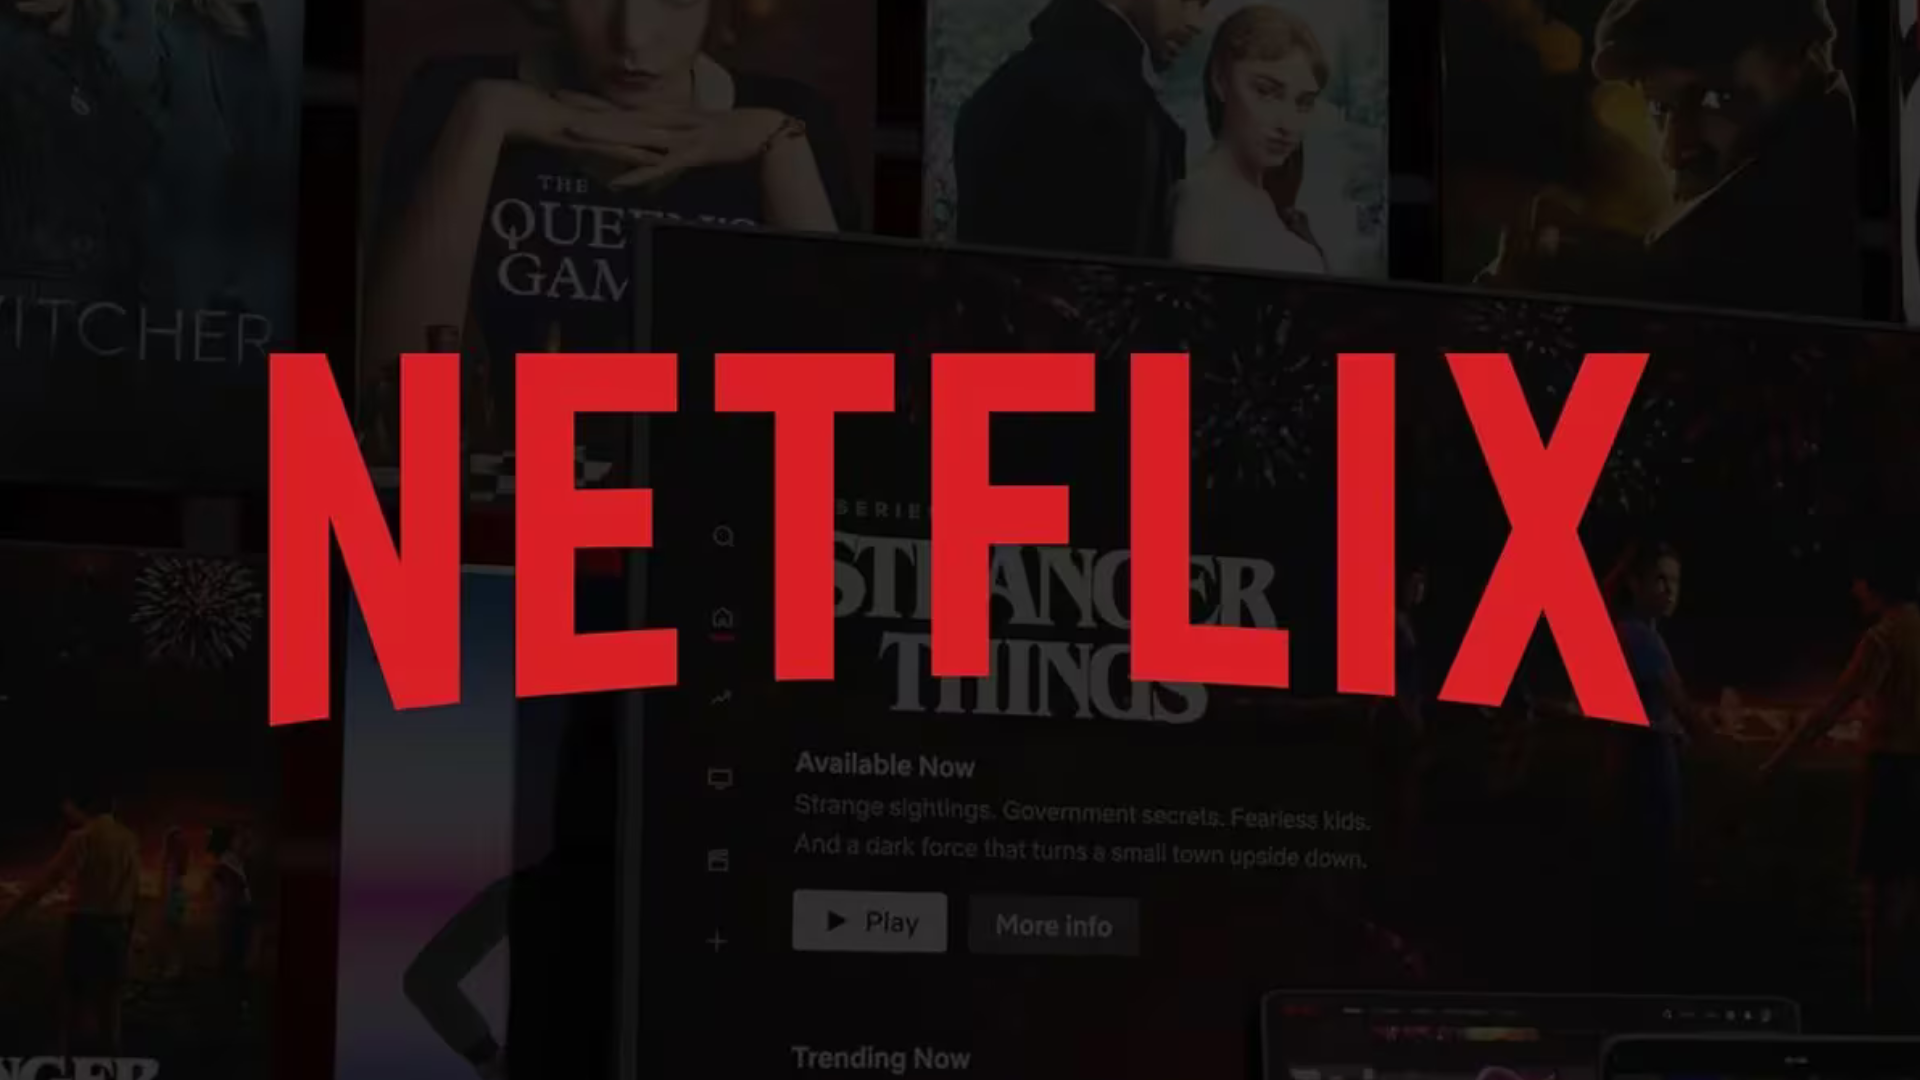 Netflix's logo is shown with show options faded into the background.